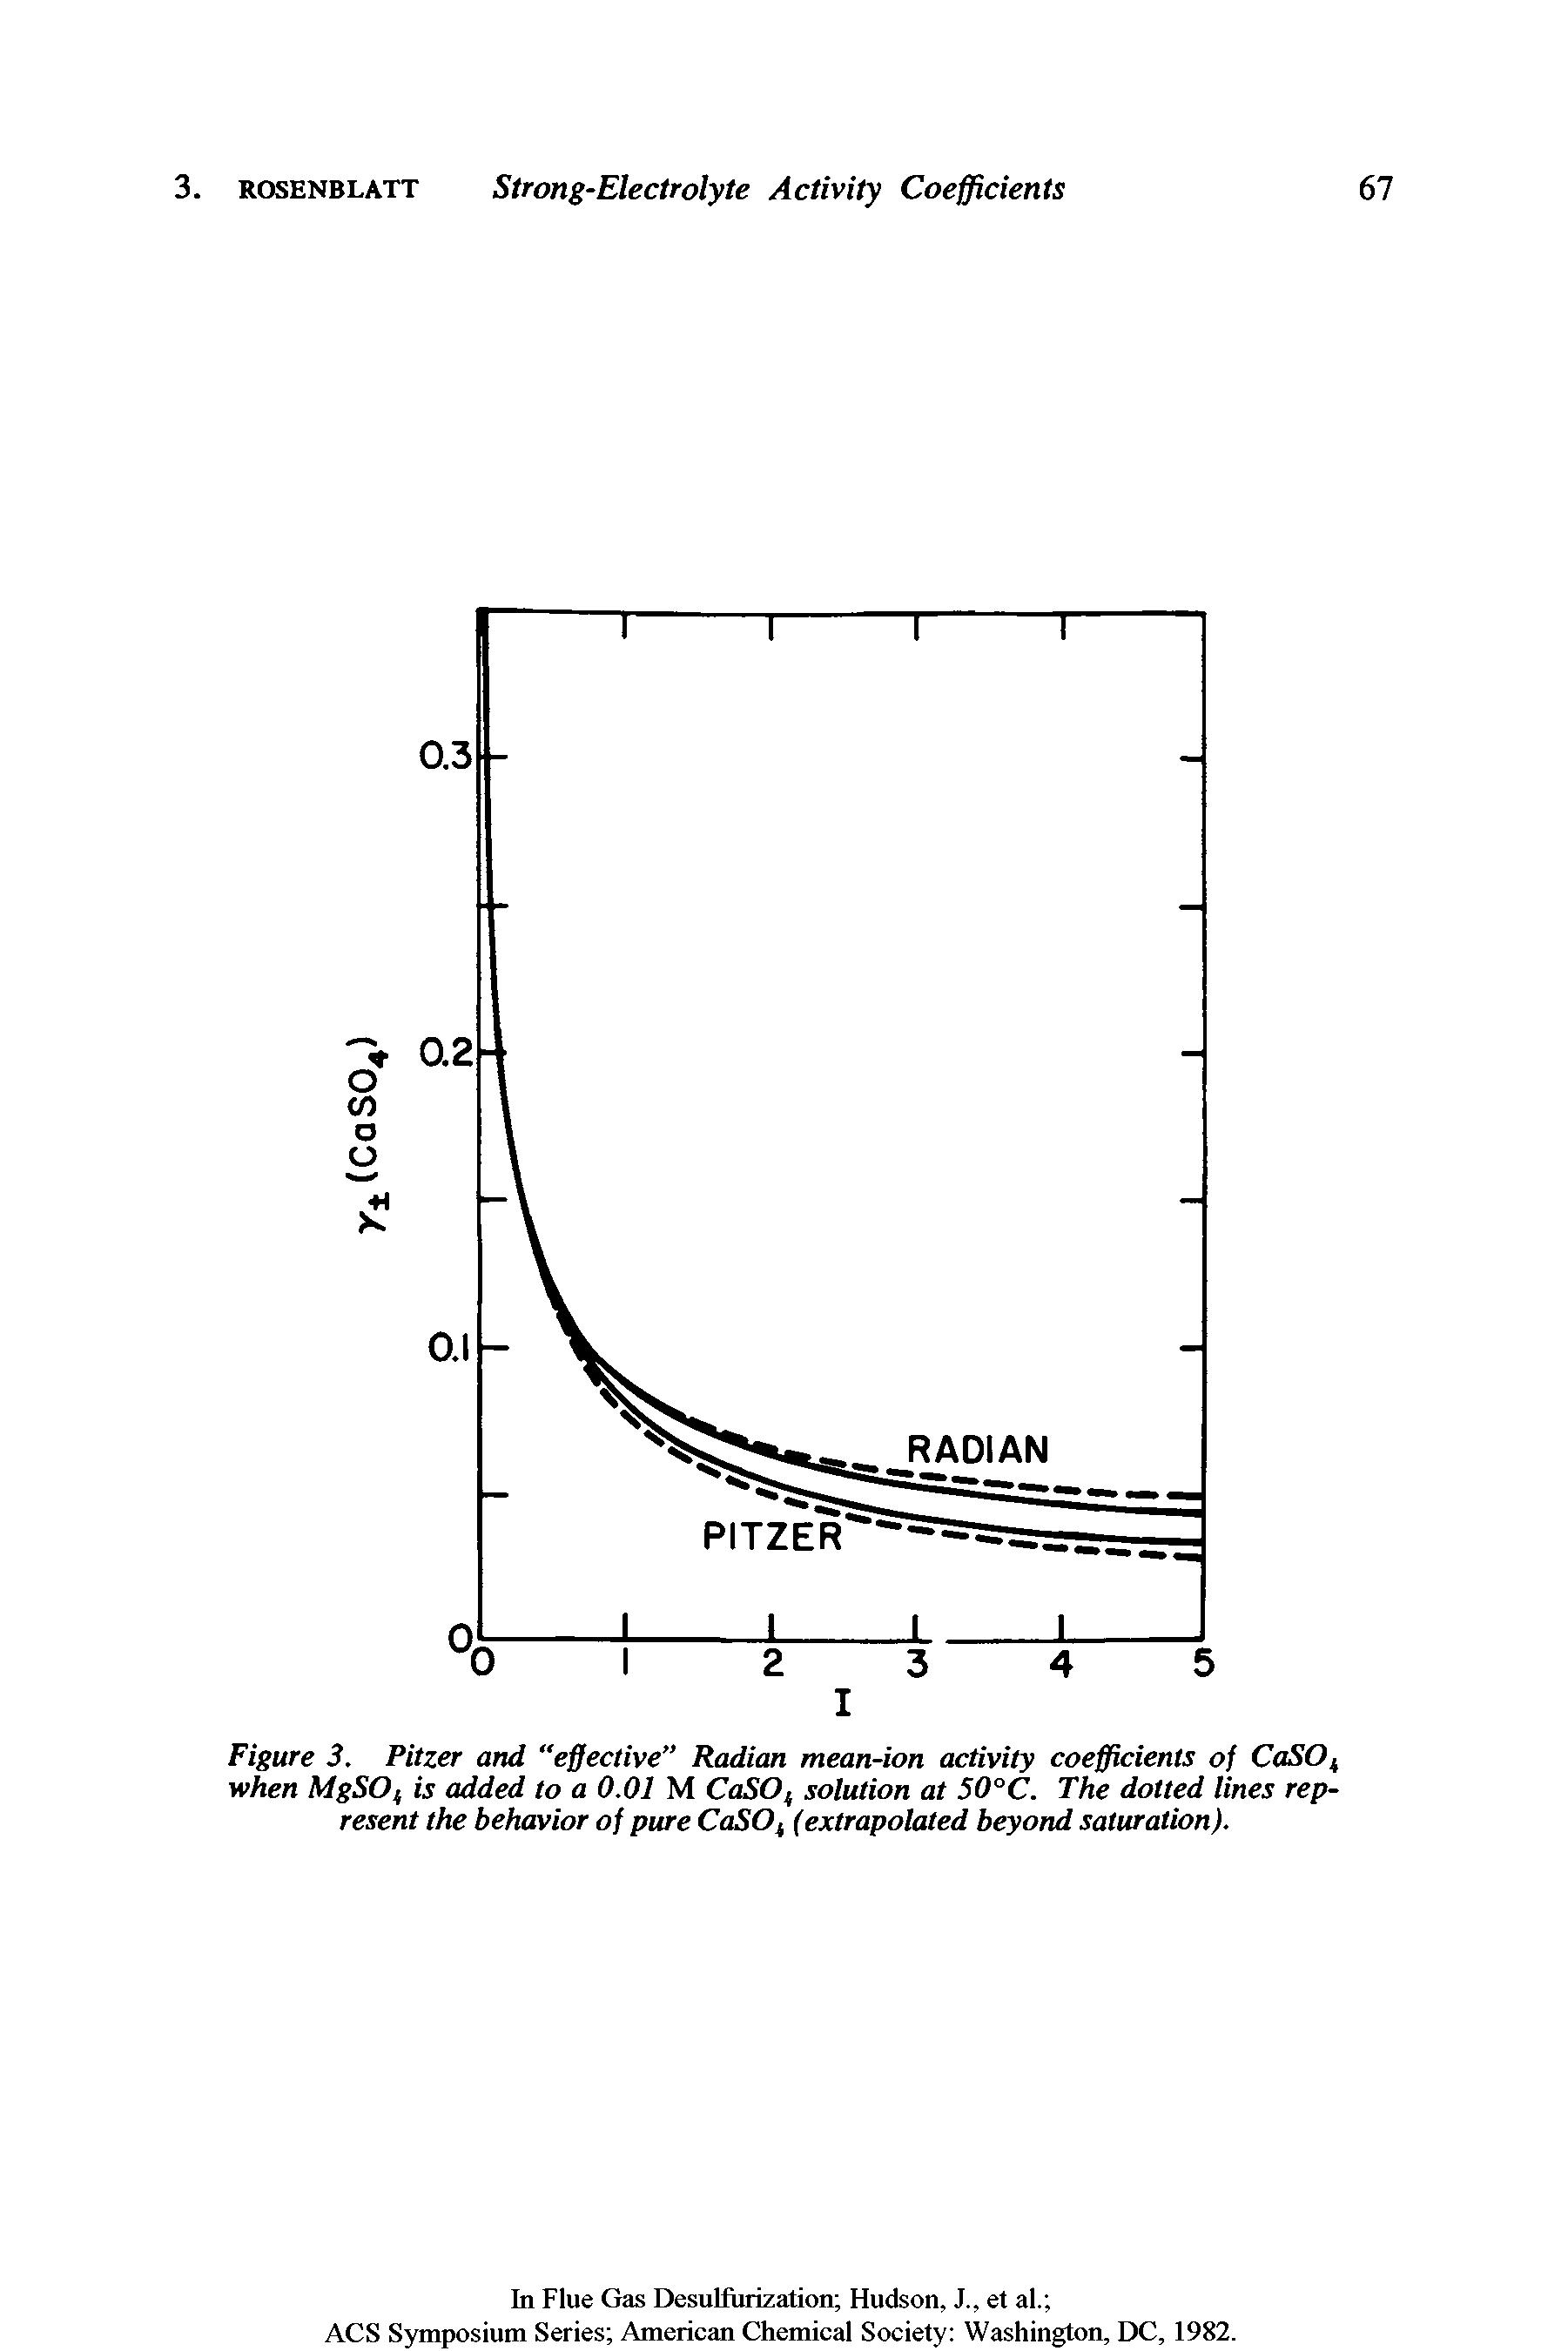 Figure 3. Pitzer and effective Radian mean-ion activity coefficients of CaSOt when MgSOt is added to a 0.01 M CaSO( solution at 50°C. The dotted lines represent the behavior of pure CaSOi (extrapolated beyond saturation).